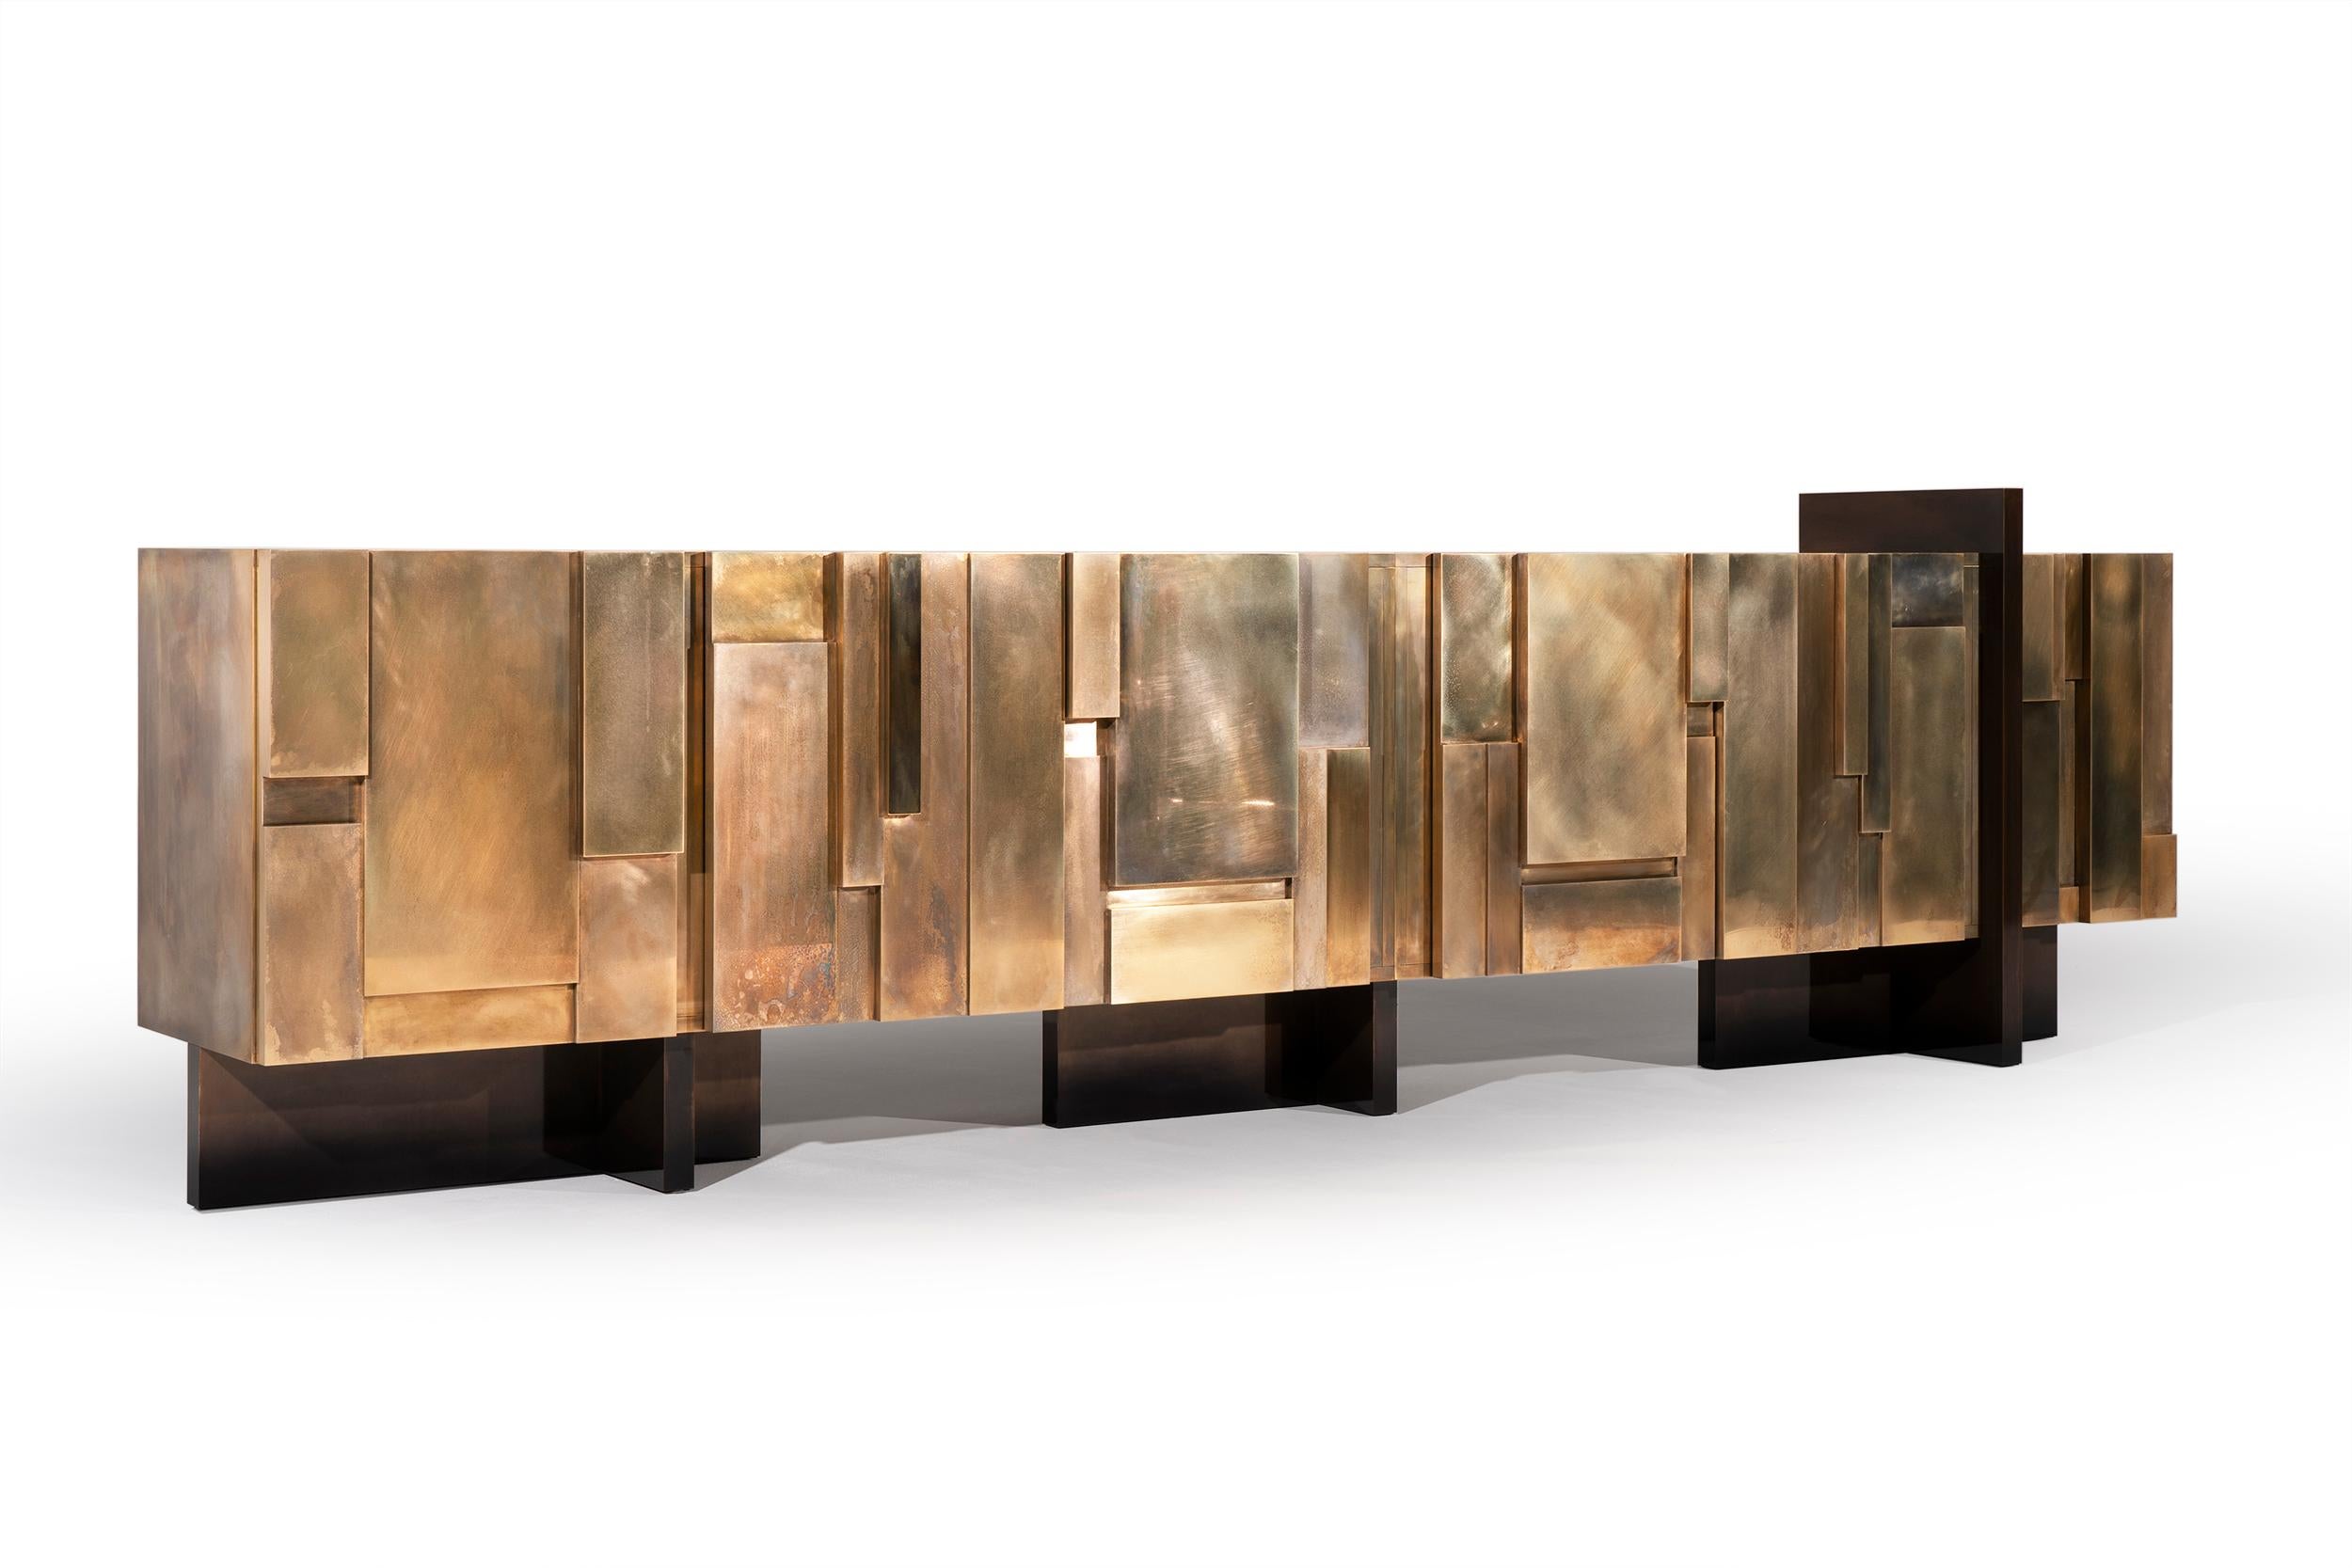 MUR - 21st century unique contemporary brass large freestanding sideboard

No matter how you look at MUR sideboard – from the top or from the side, it resembles a busy city’s skyline.
If you blur your gaze, you may recognize in the multiple